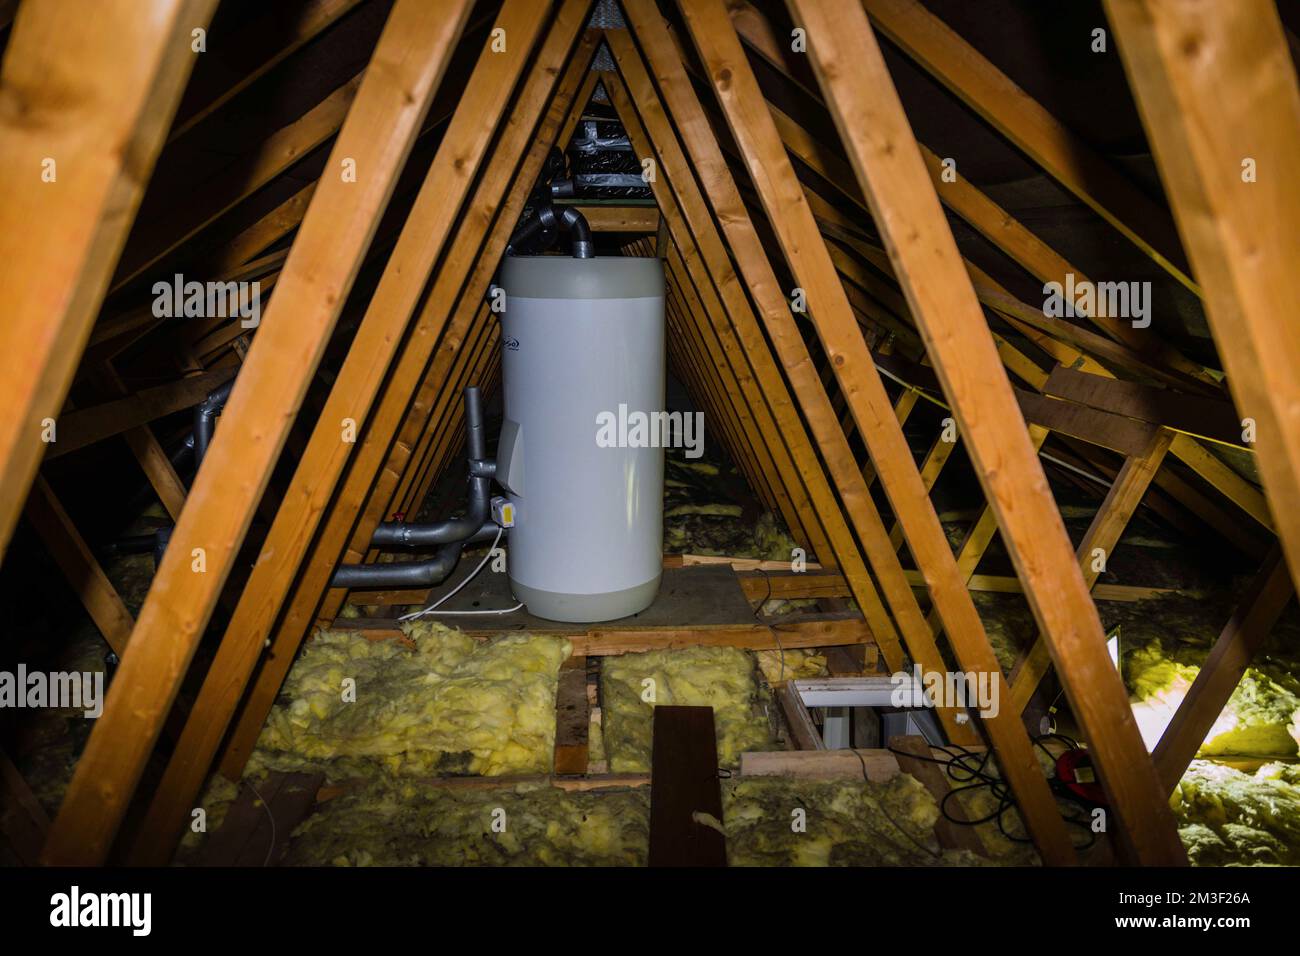 Fitting class A energy efficent hot water tank in loft of 1990's house. Stock Photo